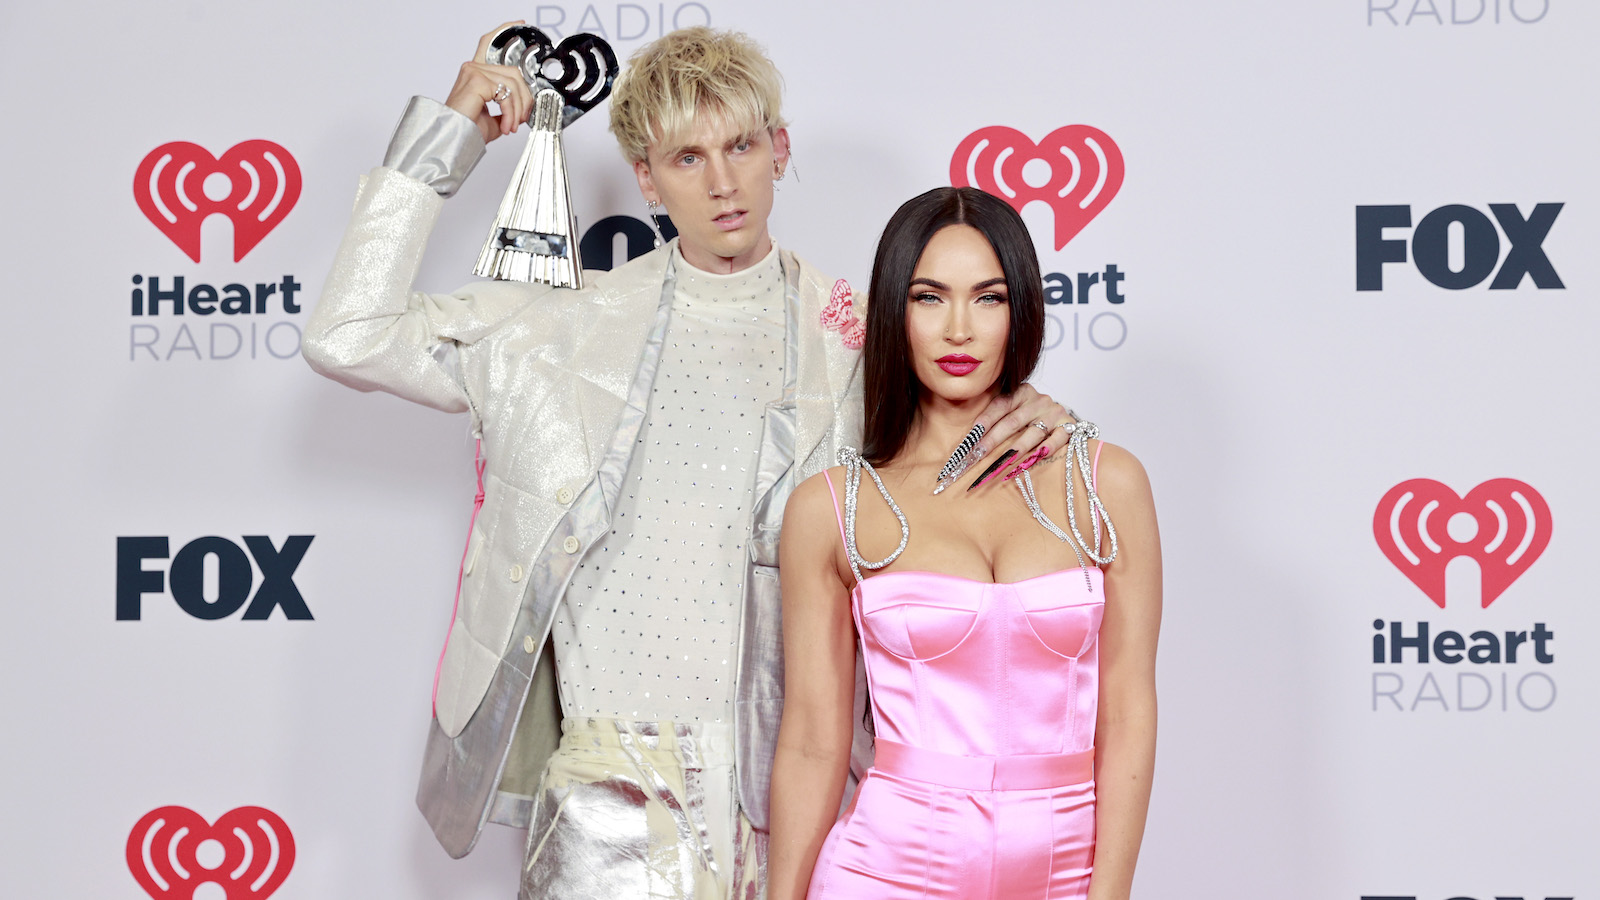 Machine Gun Kelly says his new movie is inspired by Megan Fox by way of ‘The Da Vinci Code’